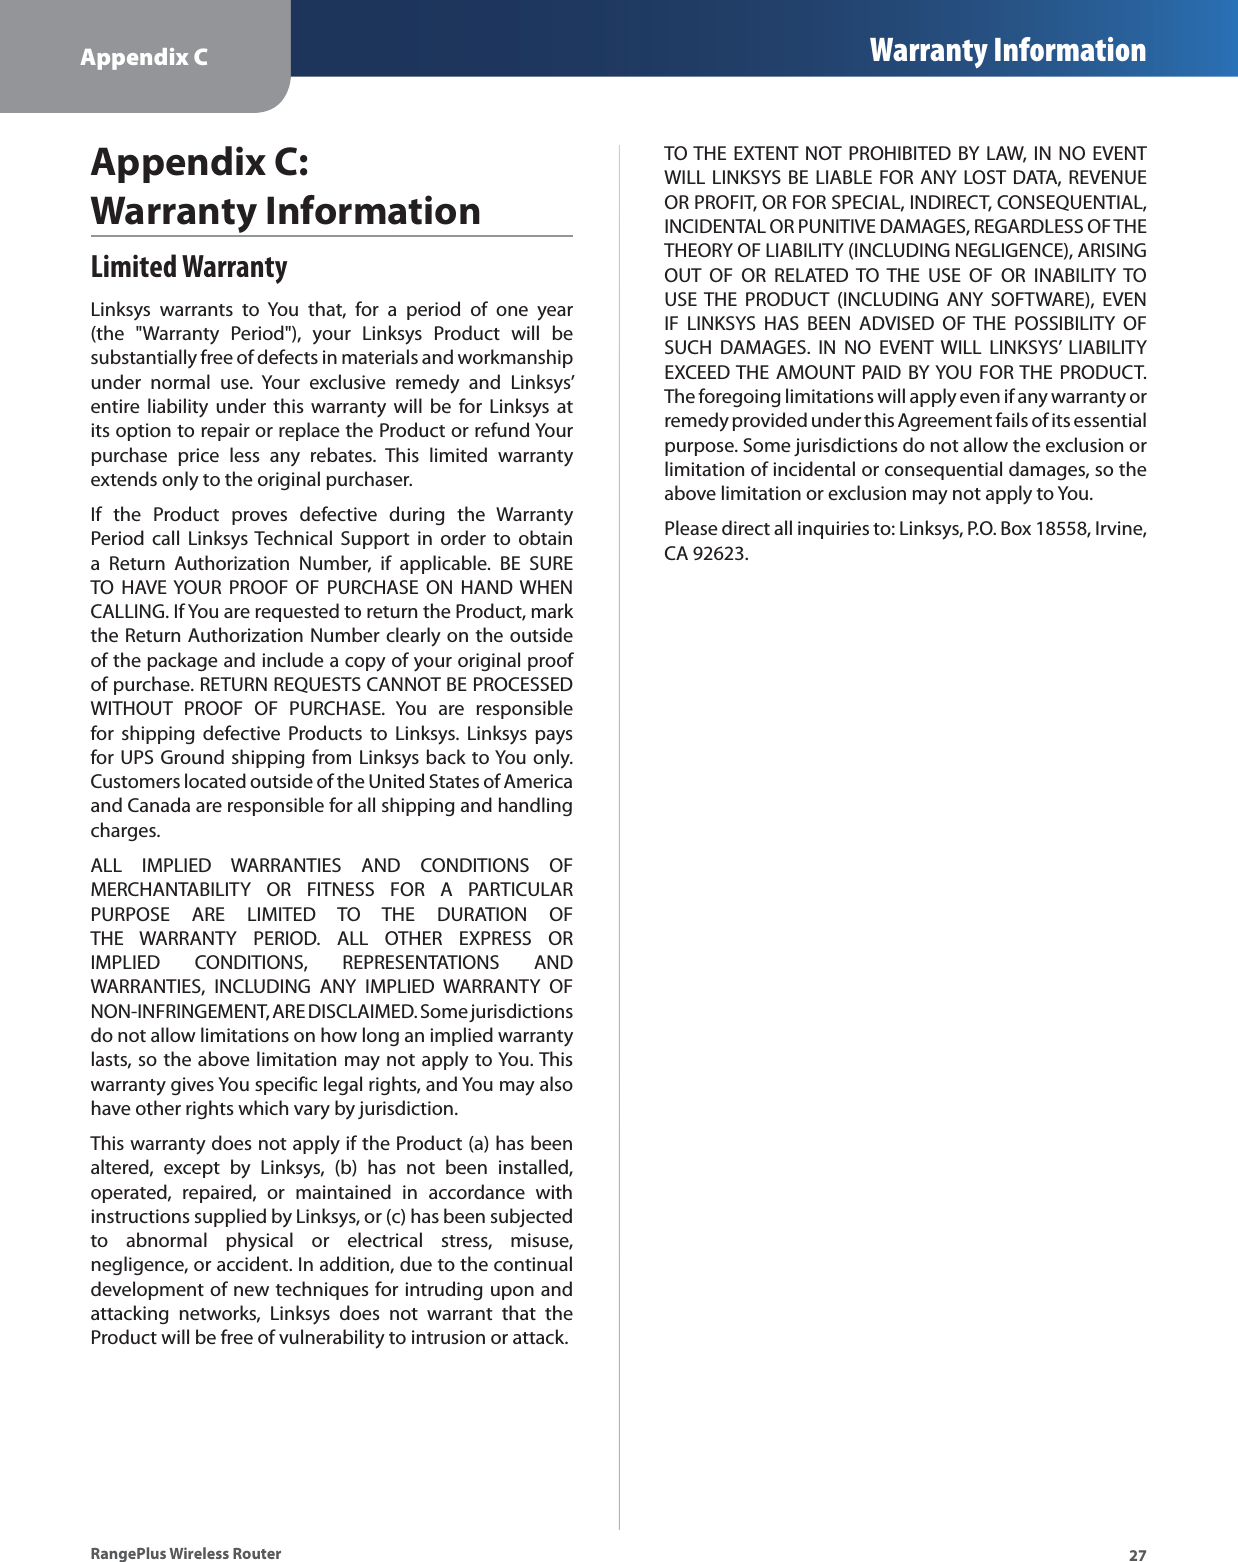 Appendix C Warranty Information27RangePlus Wireless RouterLimited WarrantyLinksys warrants to You that, for a period of one year (the &quot;Warranty Period&quot;), your Linksys Product will be substantially free of defects in materials and workmanship under normal use. Your exclusive remedy and Linksys’ entire liability under this warranty will be for Linksys at its option to repair or replace the Product or refund Your purchase price less any rebates. This limited warranty extends only to the original purchaser. If the Product proves defective during the Warranty Period call Linksys Technical Support in order to obtain a Return Authorization Number, if applicable. BE SURE TO HAVE YOUR PROOF OF PURCHASE ON HAND WHEN CALLING. If You are requested to return the Product, mark the Return Authorization Number clearly on the outside of the package and include a copy of your original proof of purchase. RETURN REQUESTS CANNOT BE PROCESSED WITHOUT PROOF OF PURCHASE. You are responsible for shipping defective Products to Linksys. Linksys pays for UPS Ground shipping from Linksys back to You only. Customers located outside of the United States of America and Canada are responsible for all shipping and handling charges. ALL IMPLIED WARRANTIES AND CONDITIONS OF MERCHANTABILITY OR FITNESS FOR A PARTICULAR PURPOSE ARE LIMITED TO THE DURATION OF THE WARRANTY PERIOD. ALL OTHER EXPRESS OR IMPLIED CONDITIONS, REPRESENTATIONS AND WARRANTIES, INCLUDING ANY IMPLIED WARRANTY OF NON-INFRINGEMENT, ARE DISCLAIMED. Some jurisdictions do not allow limitations on how long an implied warranty lasts, so the above limitation may not apply to You. This warranty gives You specific legal rights, and You may also have other rights which vary by jurisdiction.This warranty does not apply if the Product (a) has been altered, except by Linksys, (b) has not been installed, operated, repaired, or maintained in accordance with instructions supplied by Linksys, or (c) has been subjected to abnormal physical or electrical stress, misuse, negligence, or accident. In addition, due to the continual development of new techniques for intruding upon and attacking networks, Linksys does not warrant that the Product will be free of vulnerability to intrusion or attack.TO THE EXTENT NOT PROHIBITED BY LAW, IN NO EVENT WILL LINKSYS BE LIABLE FOR ANY LOST DATA, REVENUE OR PROFIT, OR FOR SPECIAL, INDIRECT, CONSEQUENTIAL, INCIDENTAL OR PUNITIVE DAMAGES, REGARDLESS OF THE THEORY OF LIABILITY (INCLUDING NEGLIGENCE), ARISING OUT OF OR RELATED TO THE USE OF OR INABILITY TO USE THE PRODUCT (INCLUDING ANY SOFTWARE), EVEN IF LINKSYS HAS BEEN ADVISED OF THE POSSIBILITY OF SUCH DAMAGES. IN NO EVENT WILL LINKSYS’ LIABILITY EXCEED THE AMOUNT PAID BY YOU FOR THE PRODUCT. The foregoing limitations will apply even if any warranty or remedy provided under this Agreement fails of its essential purpose. Some jurisdictions do not allow the exclusion or limitation of incidental or consequential damages, so the above limitation or exclusion may not apply to You.Please direct all inquiries to: Linksys, P.O. Box 18558, Irvine, CA 92623.Appendix C: Warranty Information